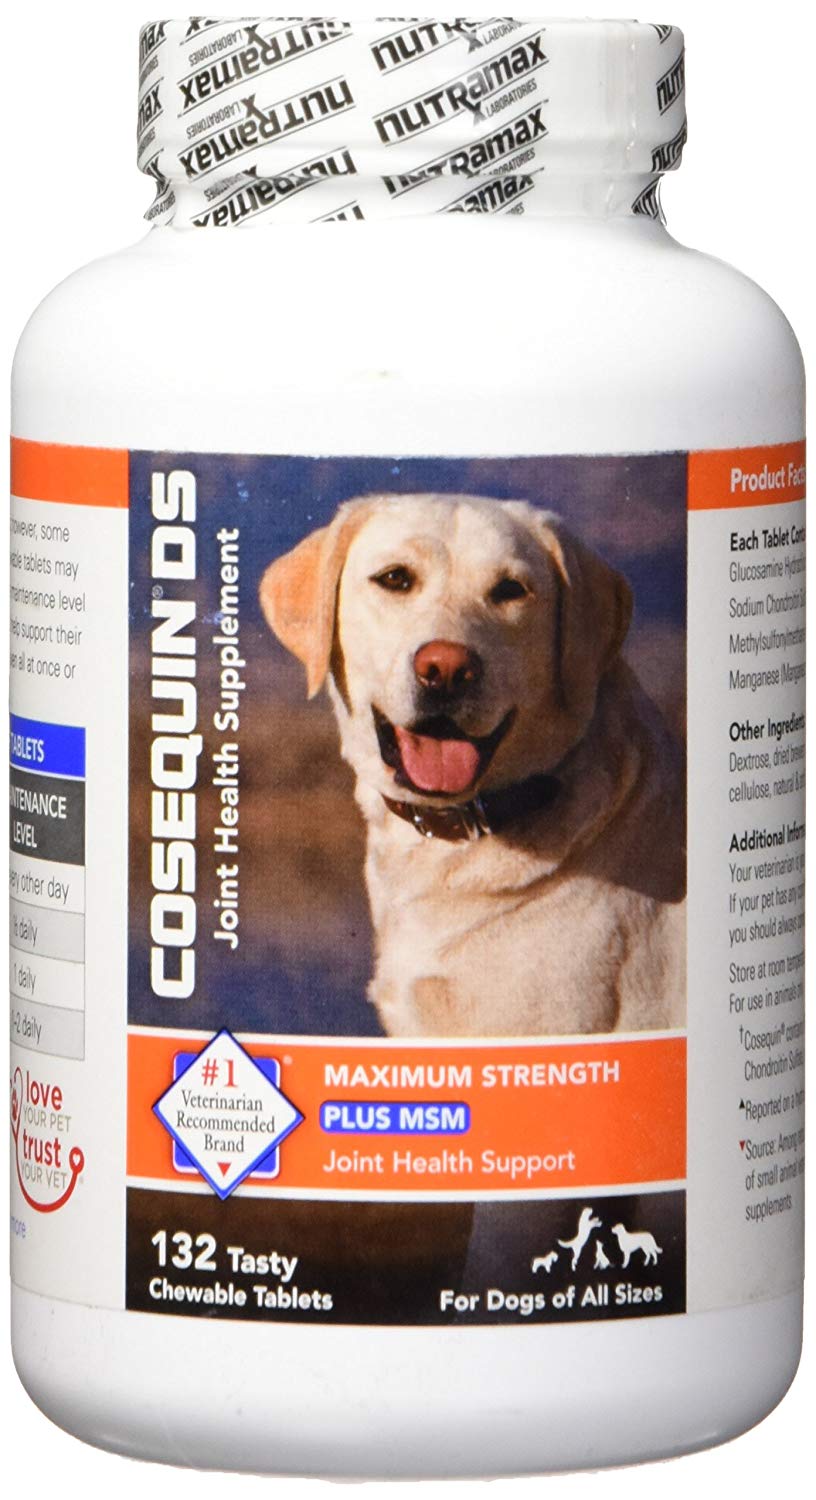 save-up-to-30-on-nutramax-s-cosequin-dasuquin-pet-supplements